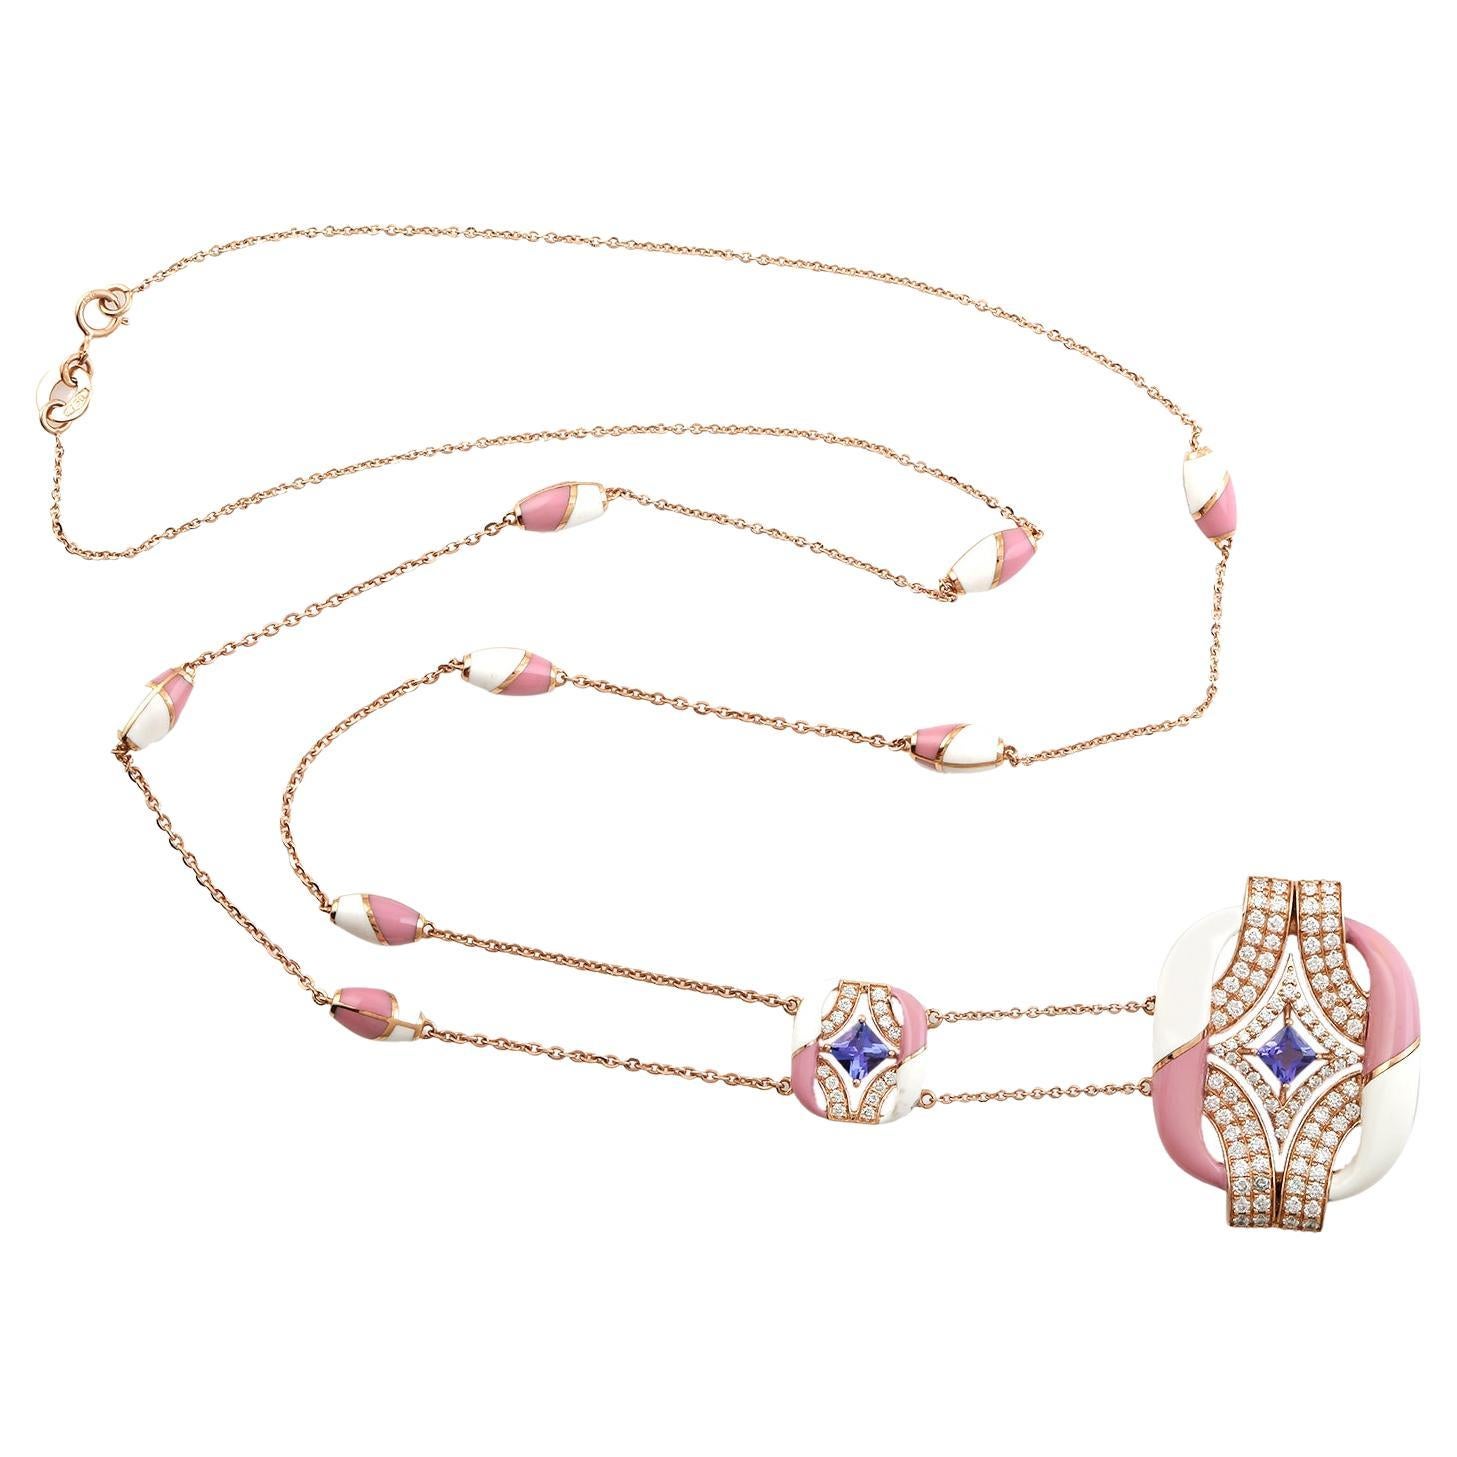 18k Rose Gold Necklace With Center Tanzanite and Pink & White Ceramic Stations